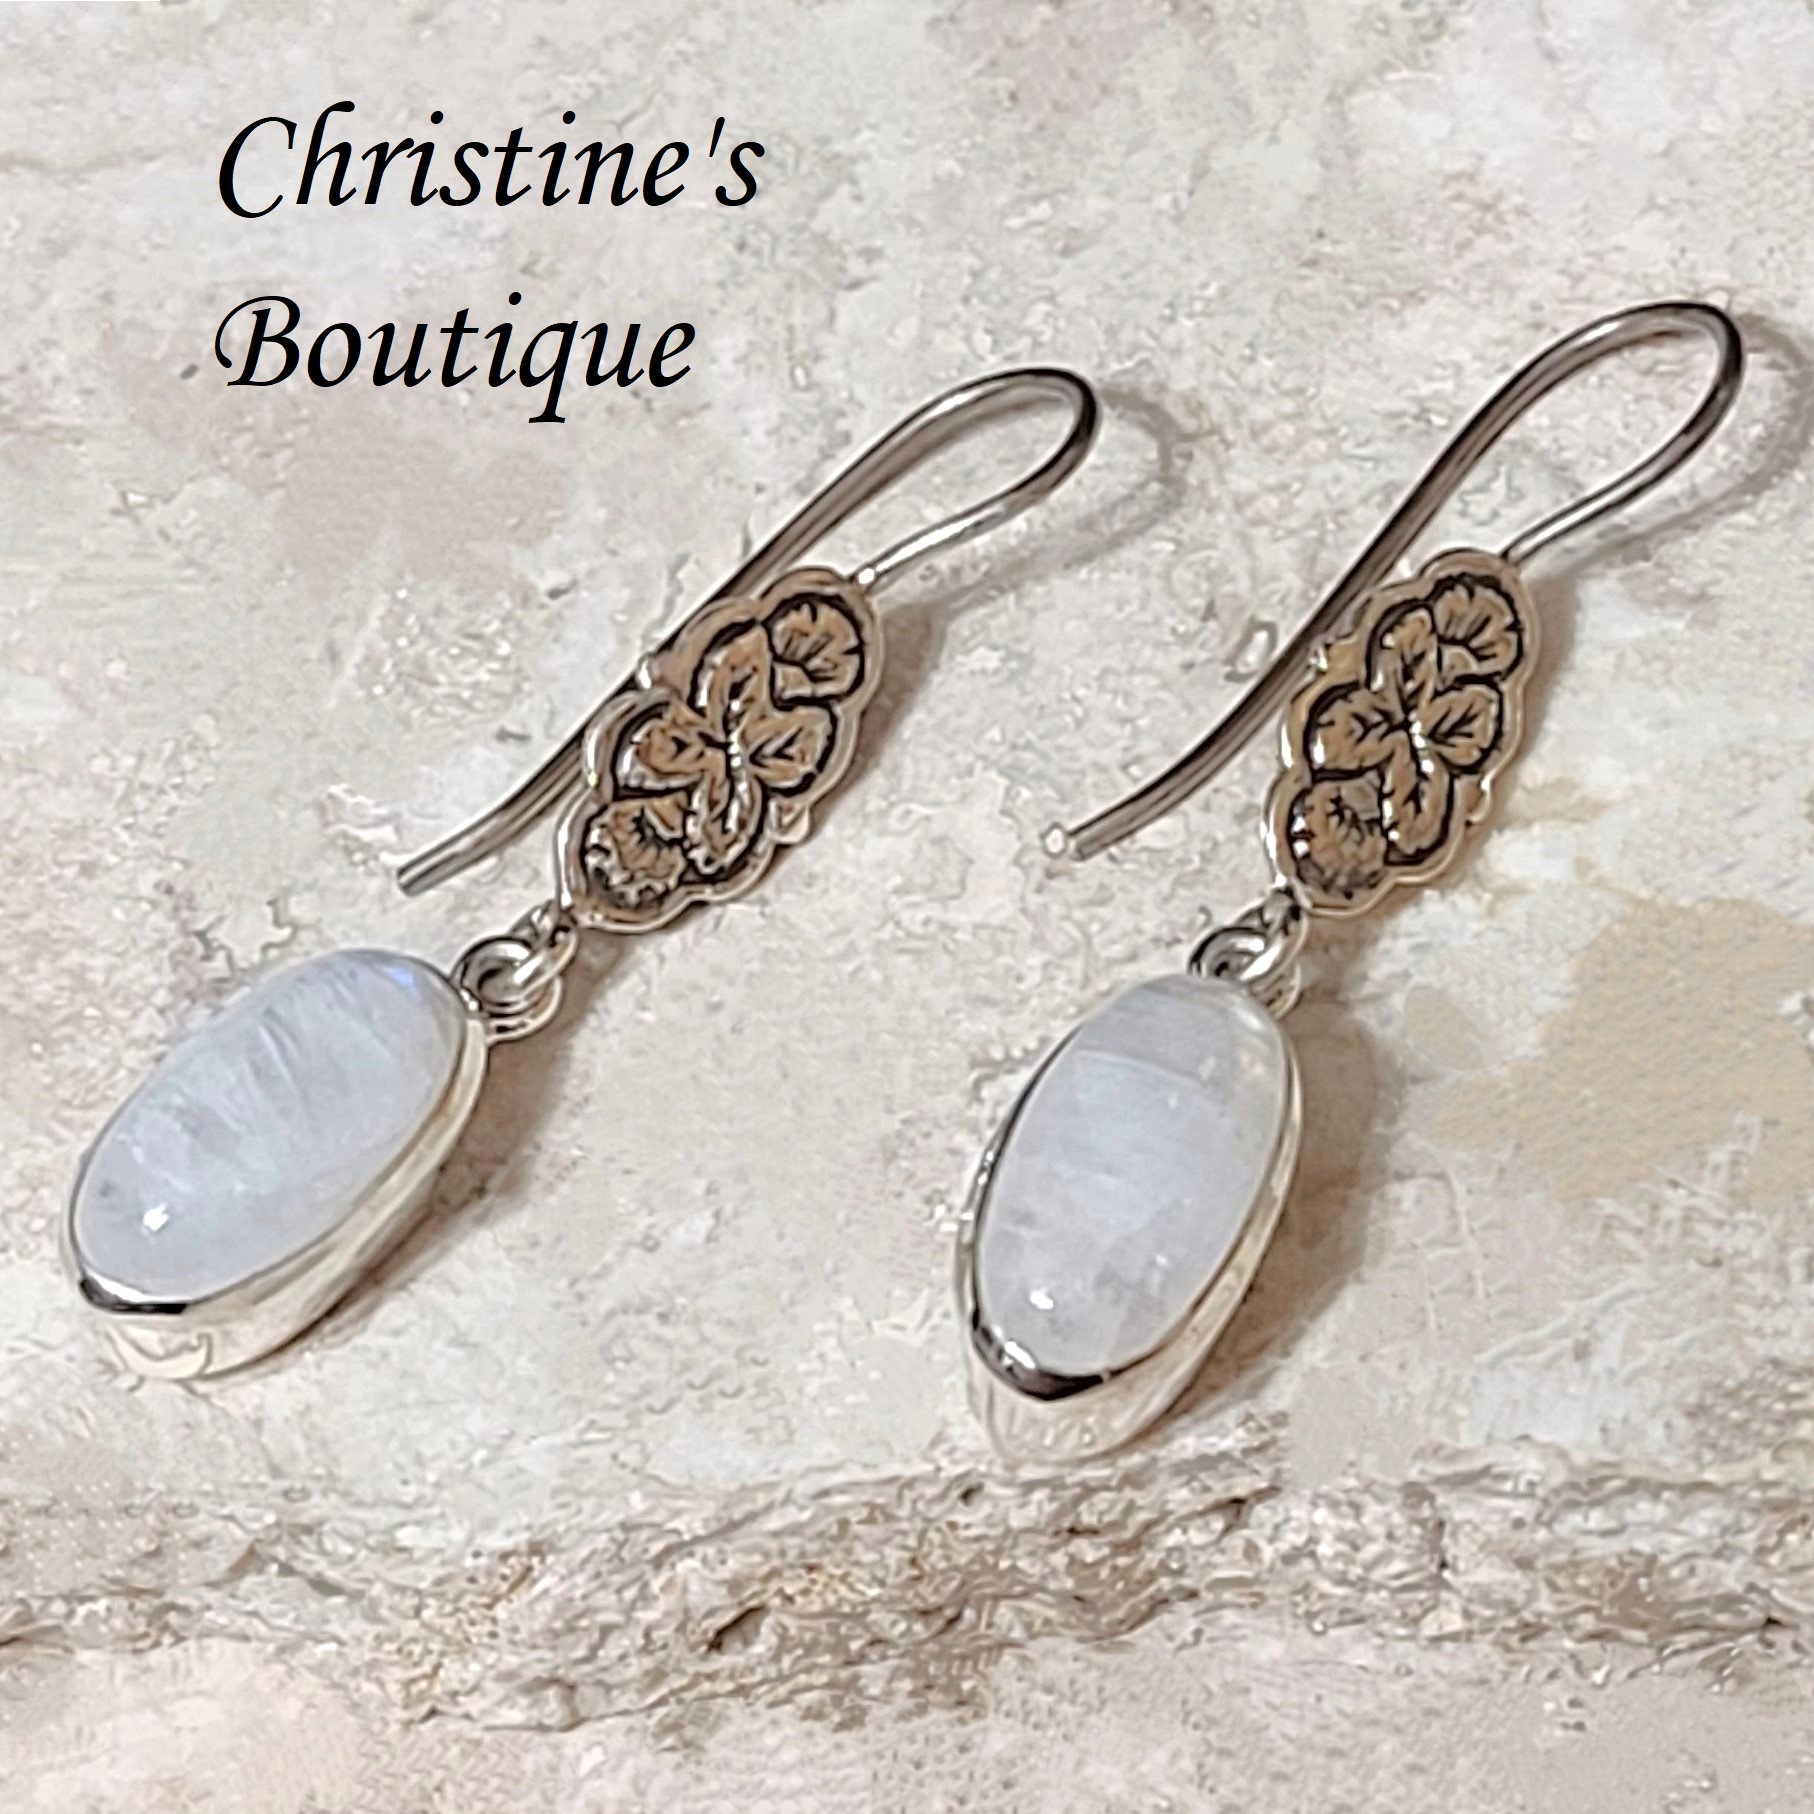 Moonstone earrings, with 925 sterling silver setting